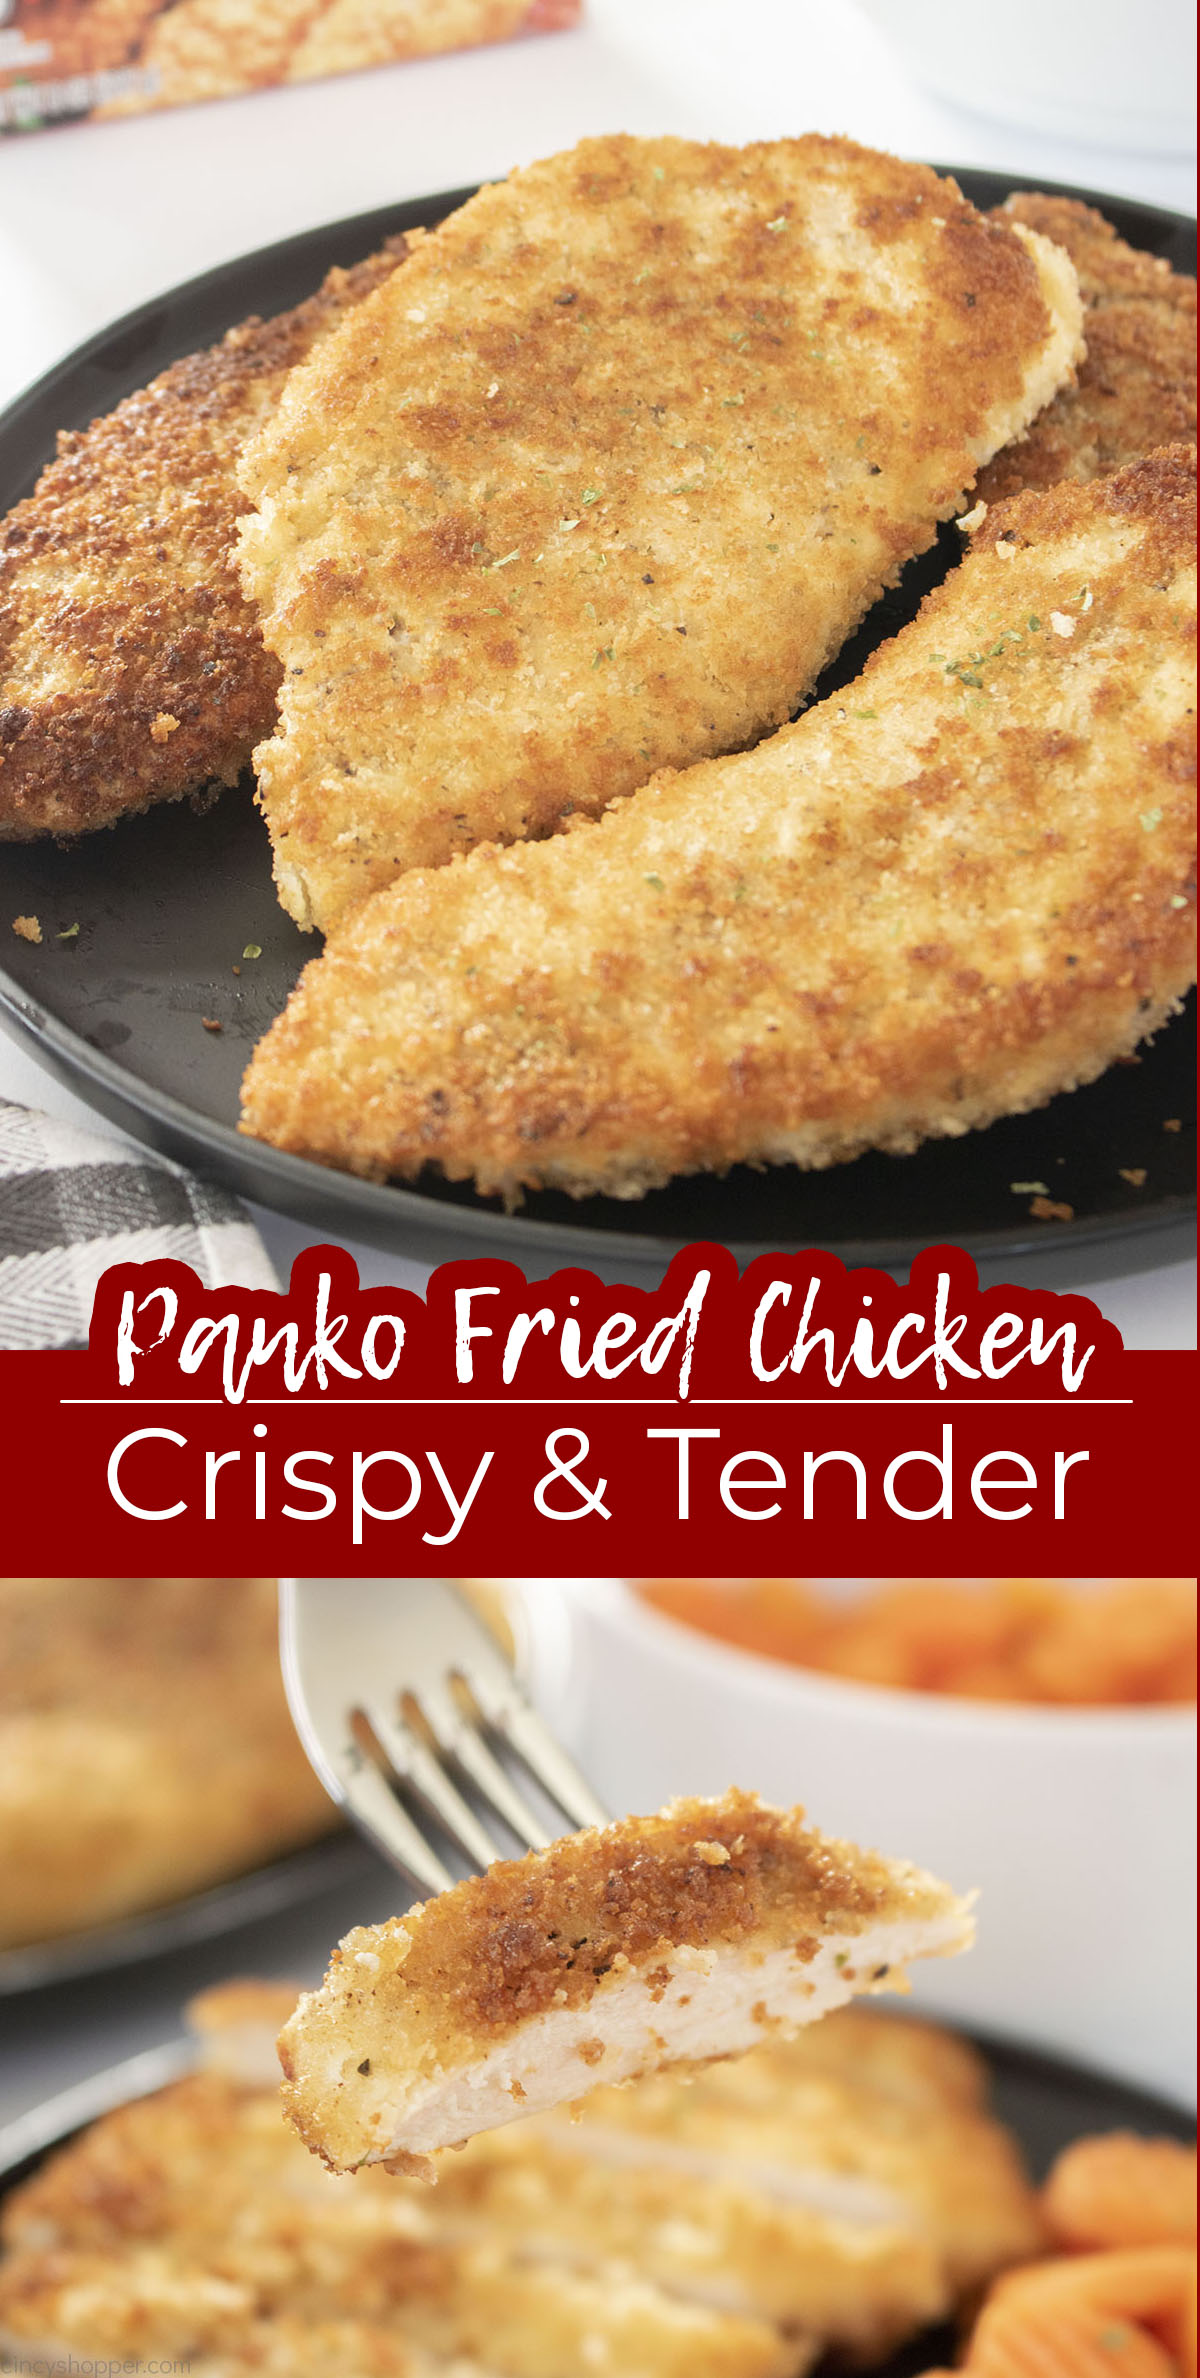 Long pin Text on image Panko Fried Chicken Crispy and Tender.